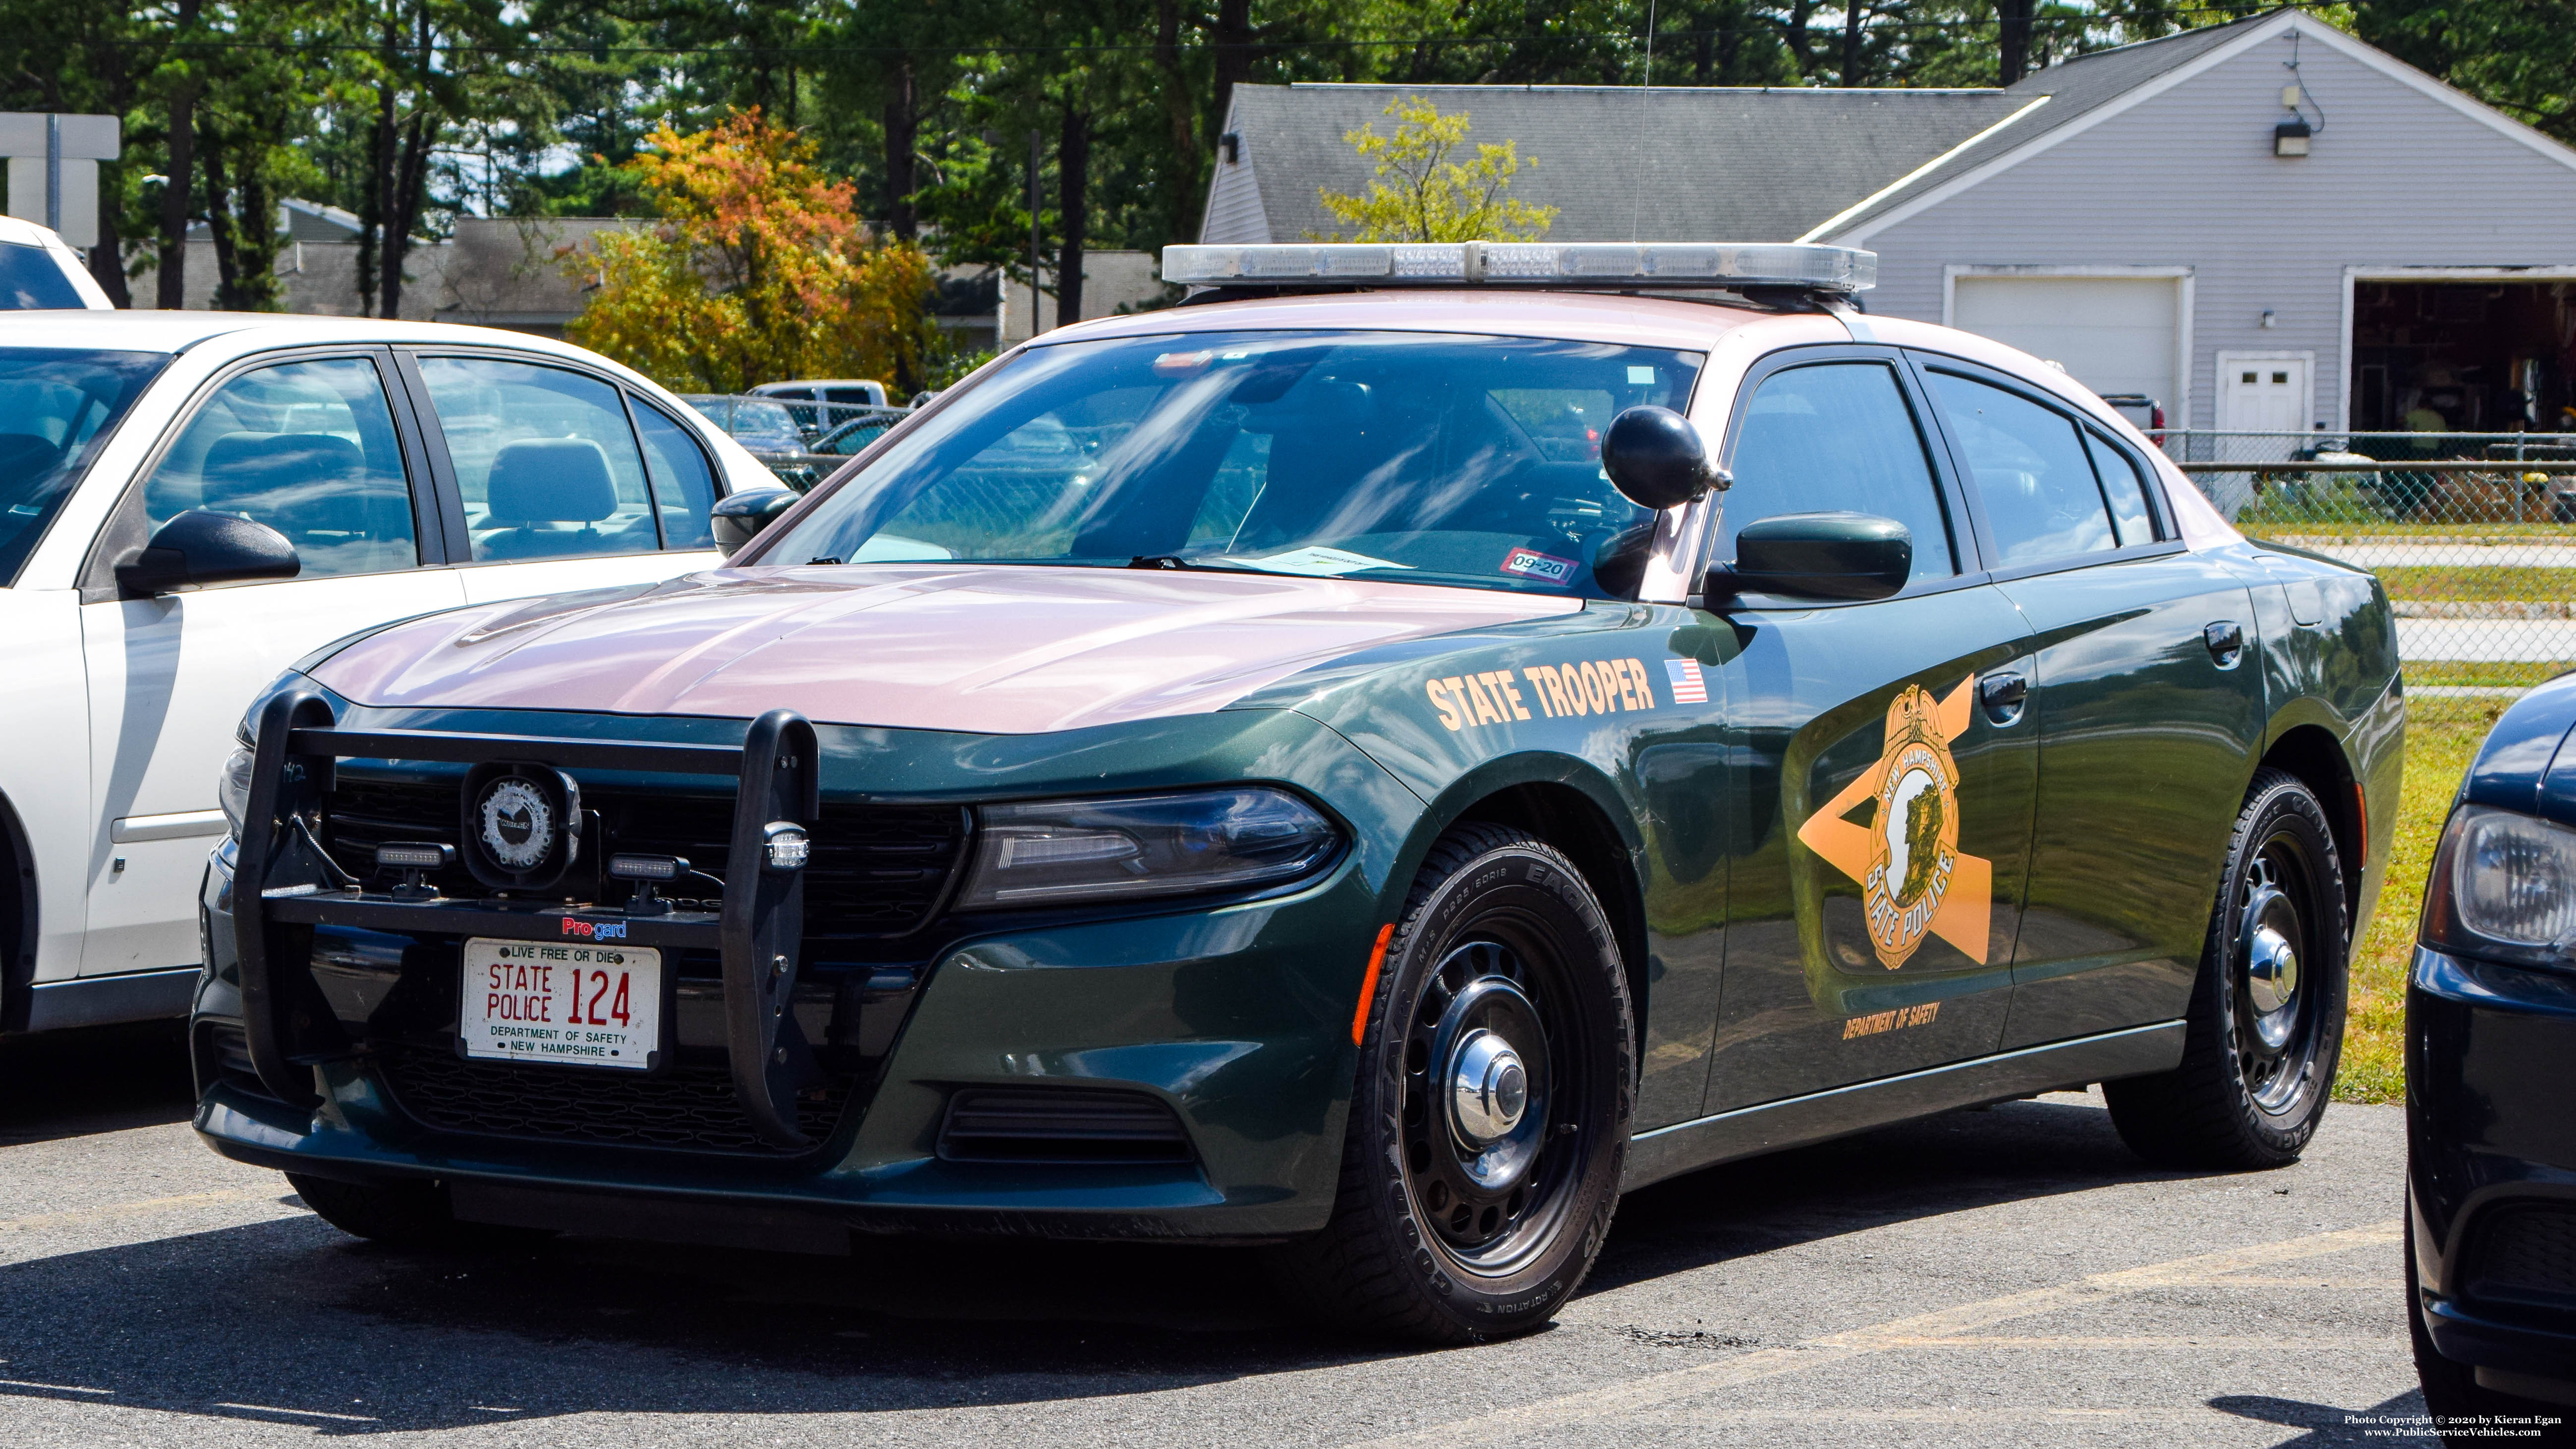 A photo  of New Hampshire State Police
            Cruiser 124, a 2015-2019 Dodge Charger             taken by Kieran Egan